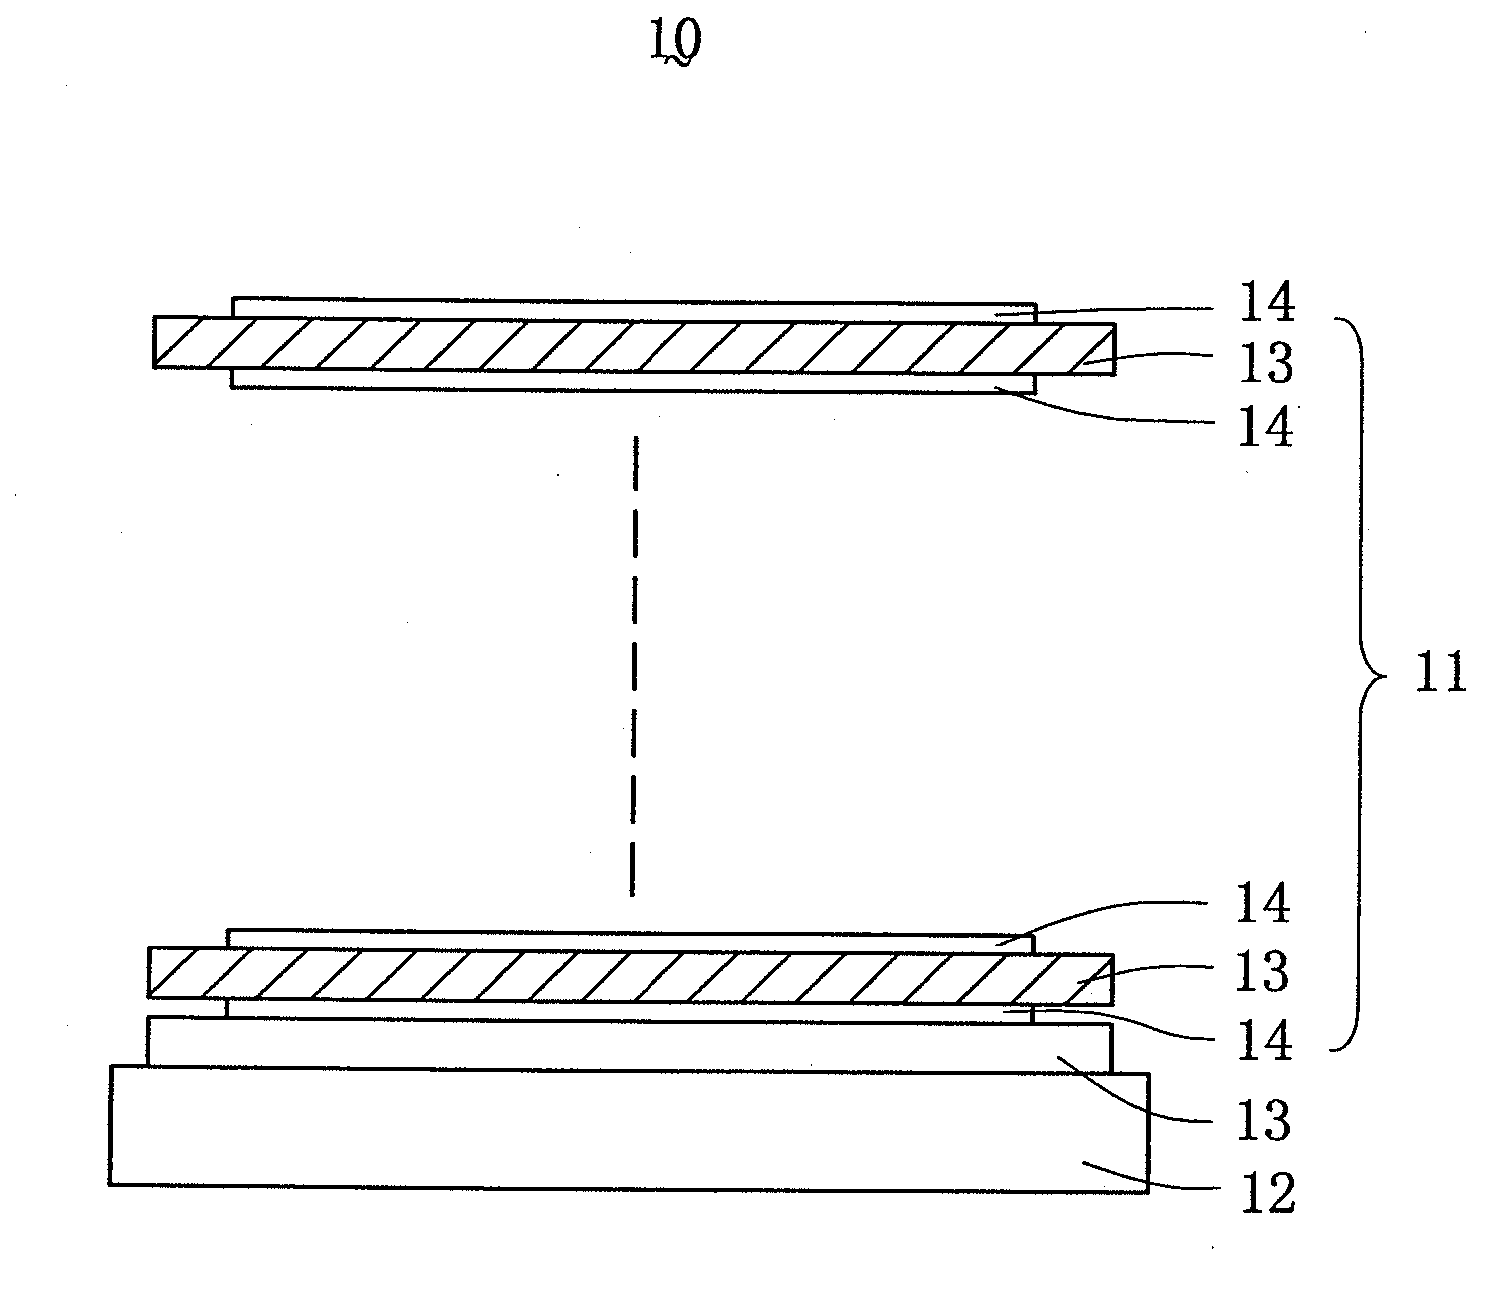 Optical multilayer thin-film system